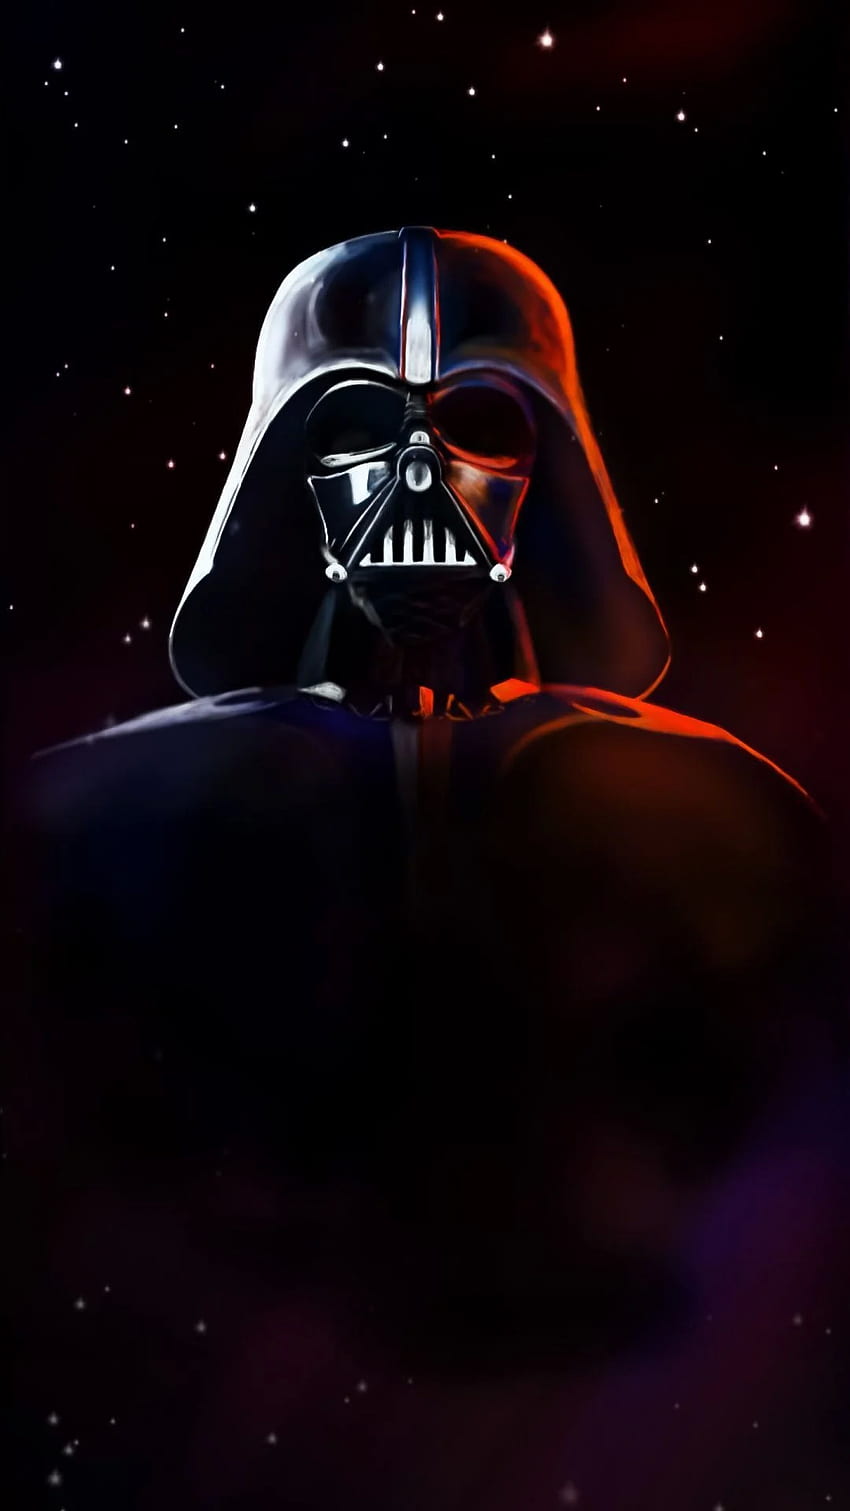 Darth Vader Rogue One Android Background in 2020. Gwiezdne wojny , Darth vader rysunek, Darth vader Tapeta na telefon HD